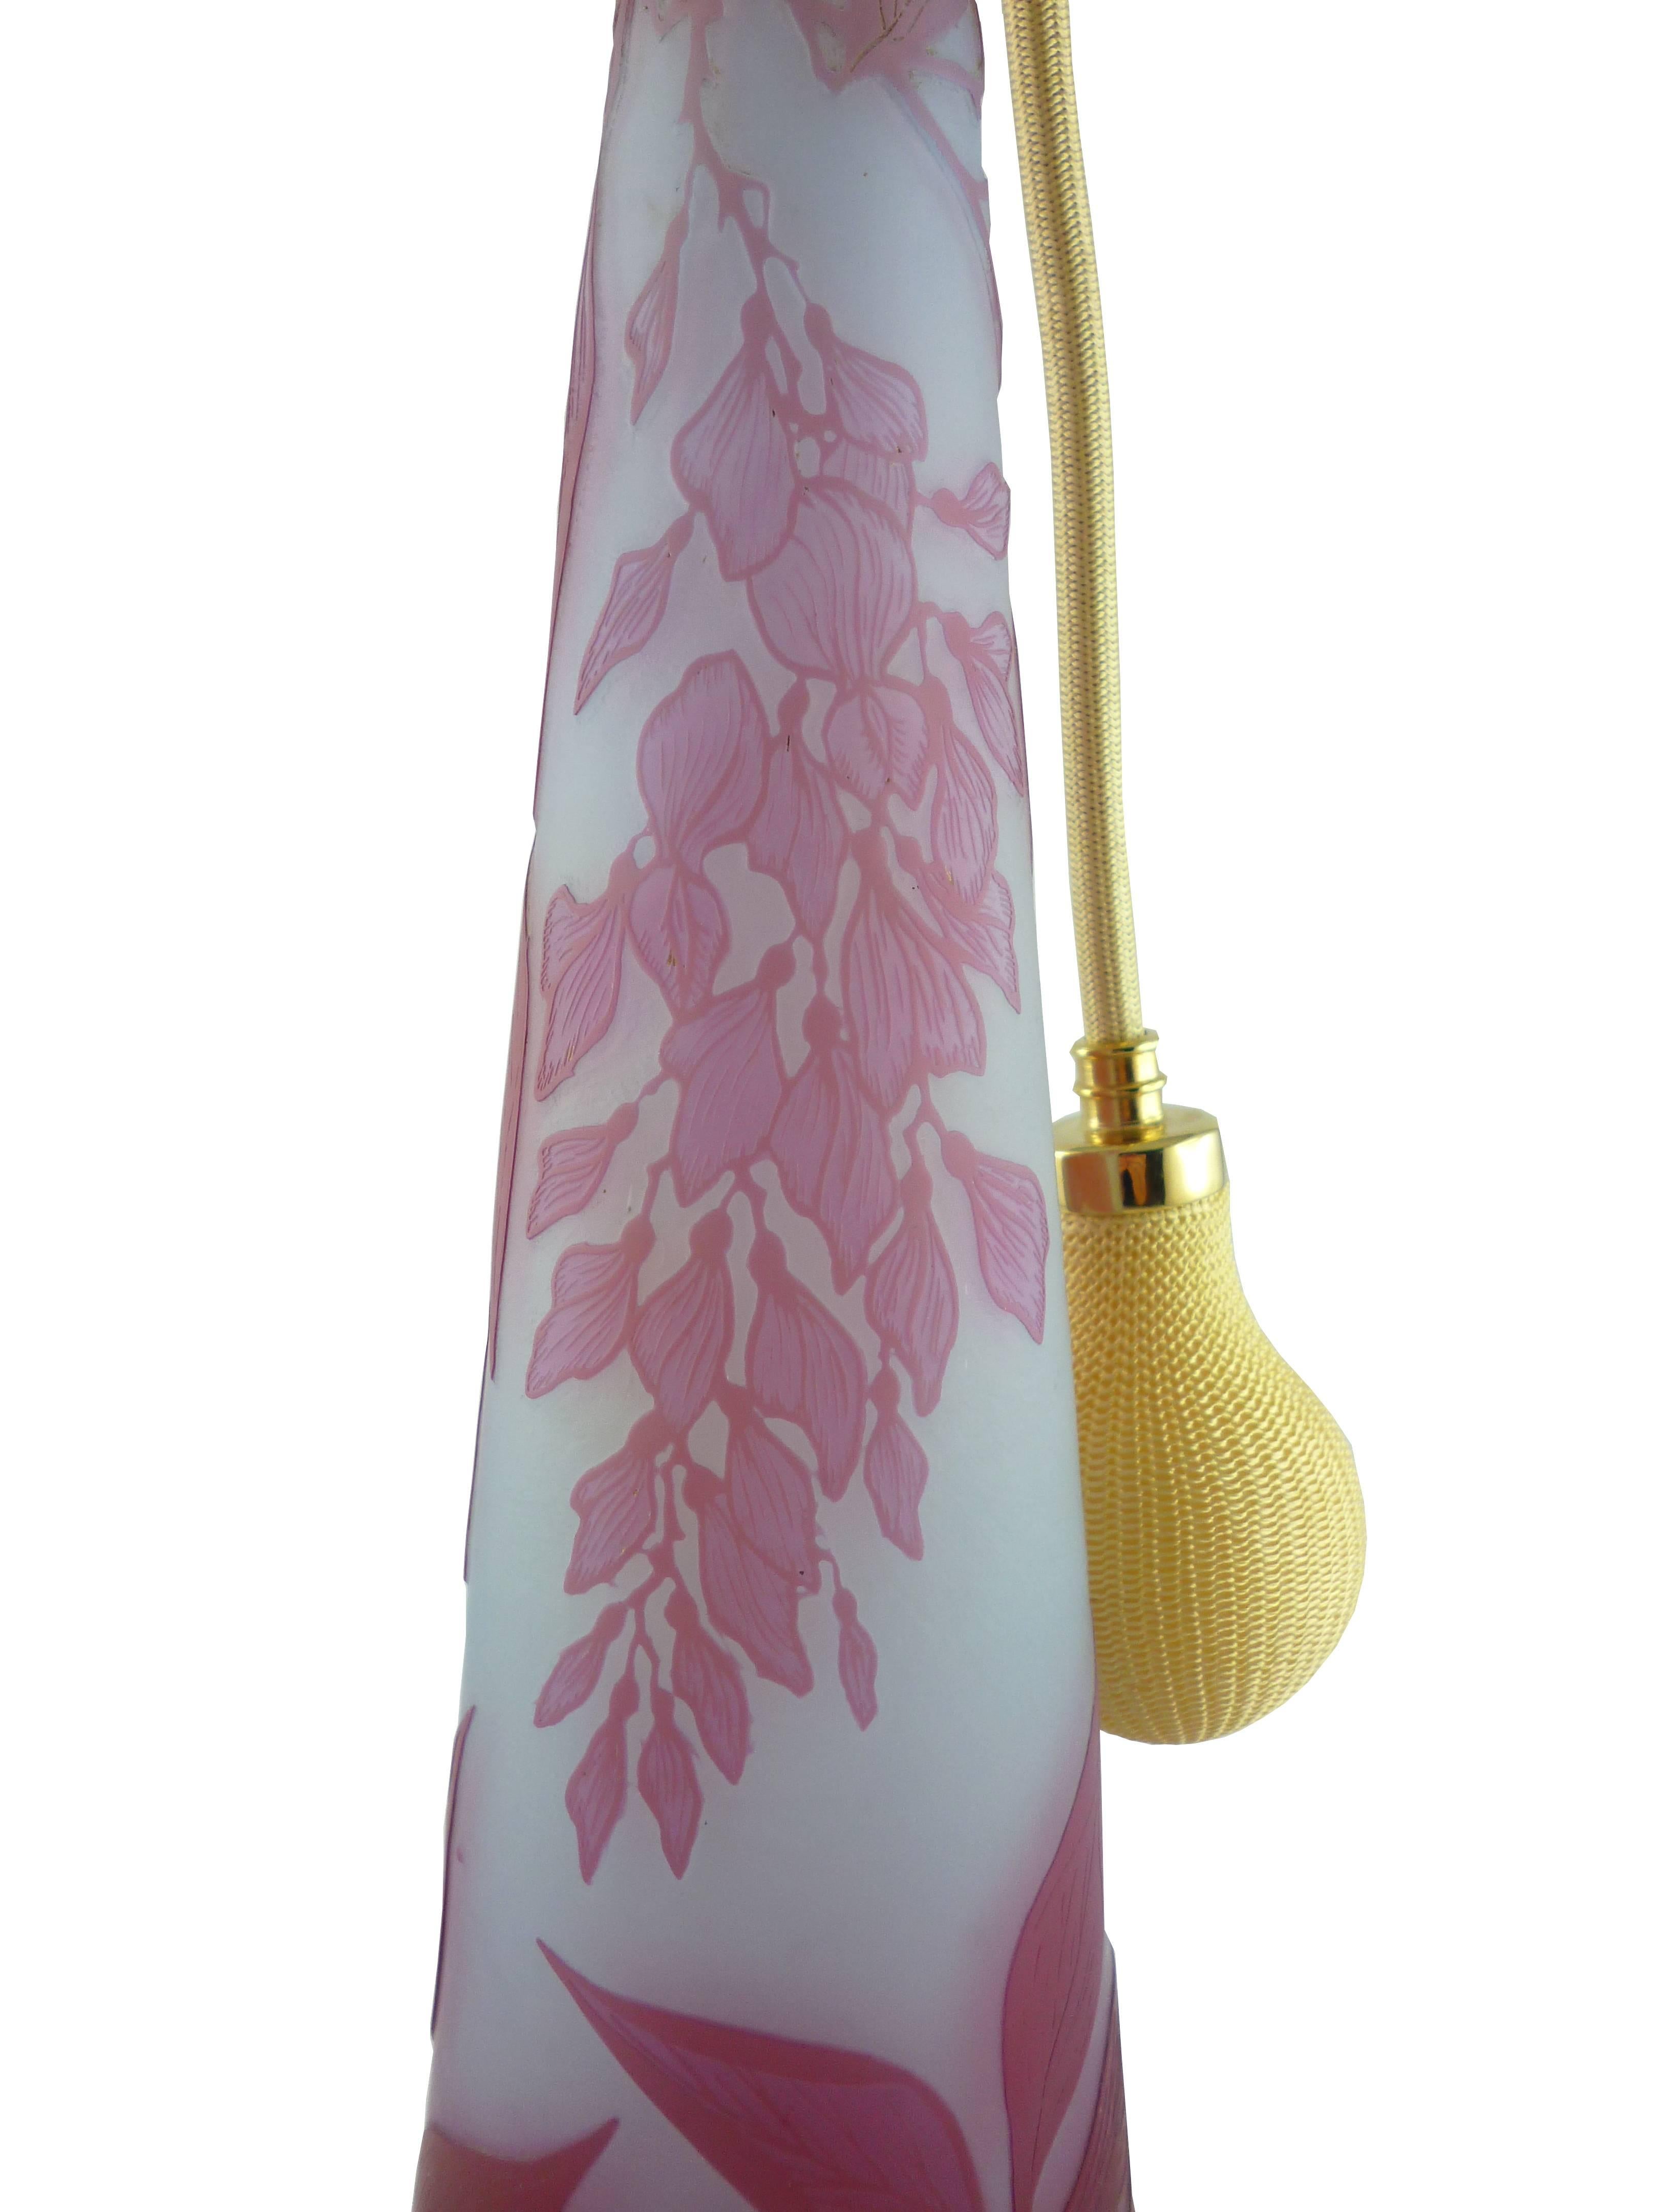 Georges Raspiller Ecole de Nancy Acid Etched Wisteria Perfume Atomizer In Excellent Condition In Nice, FR